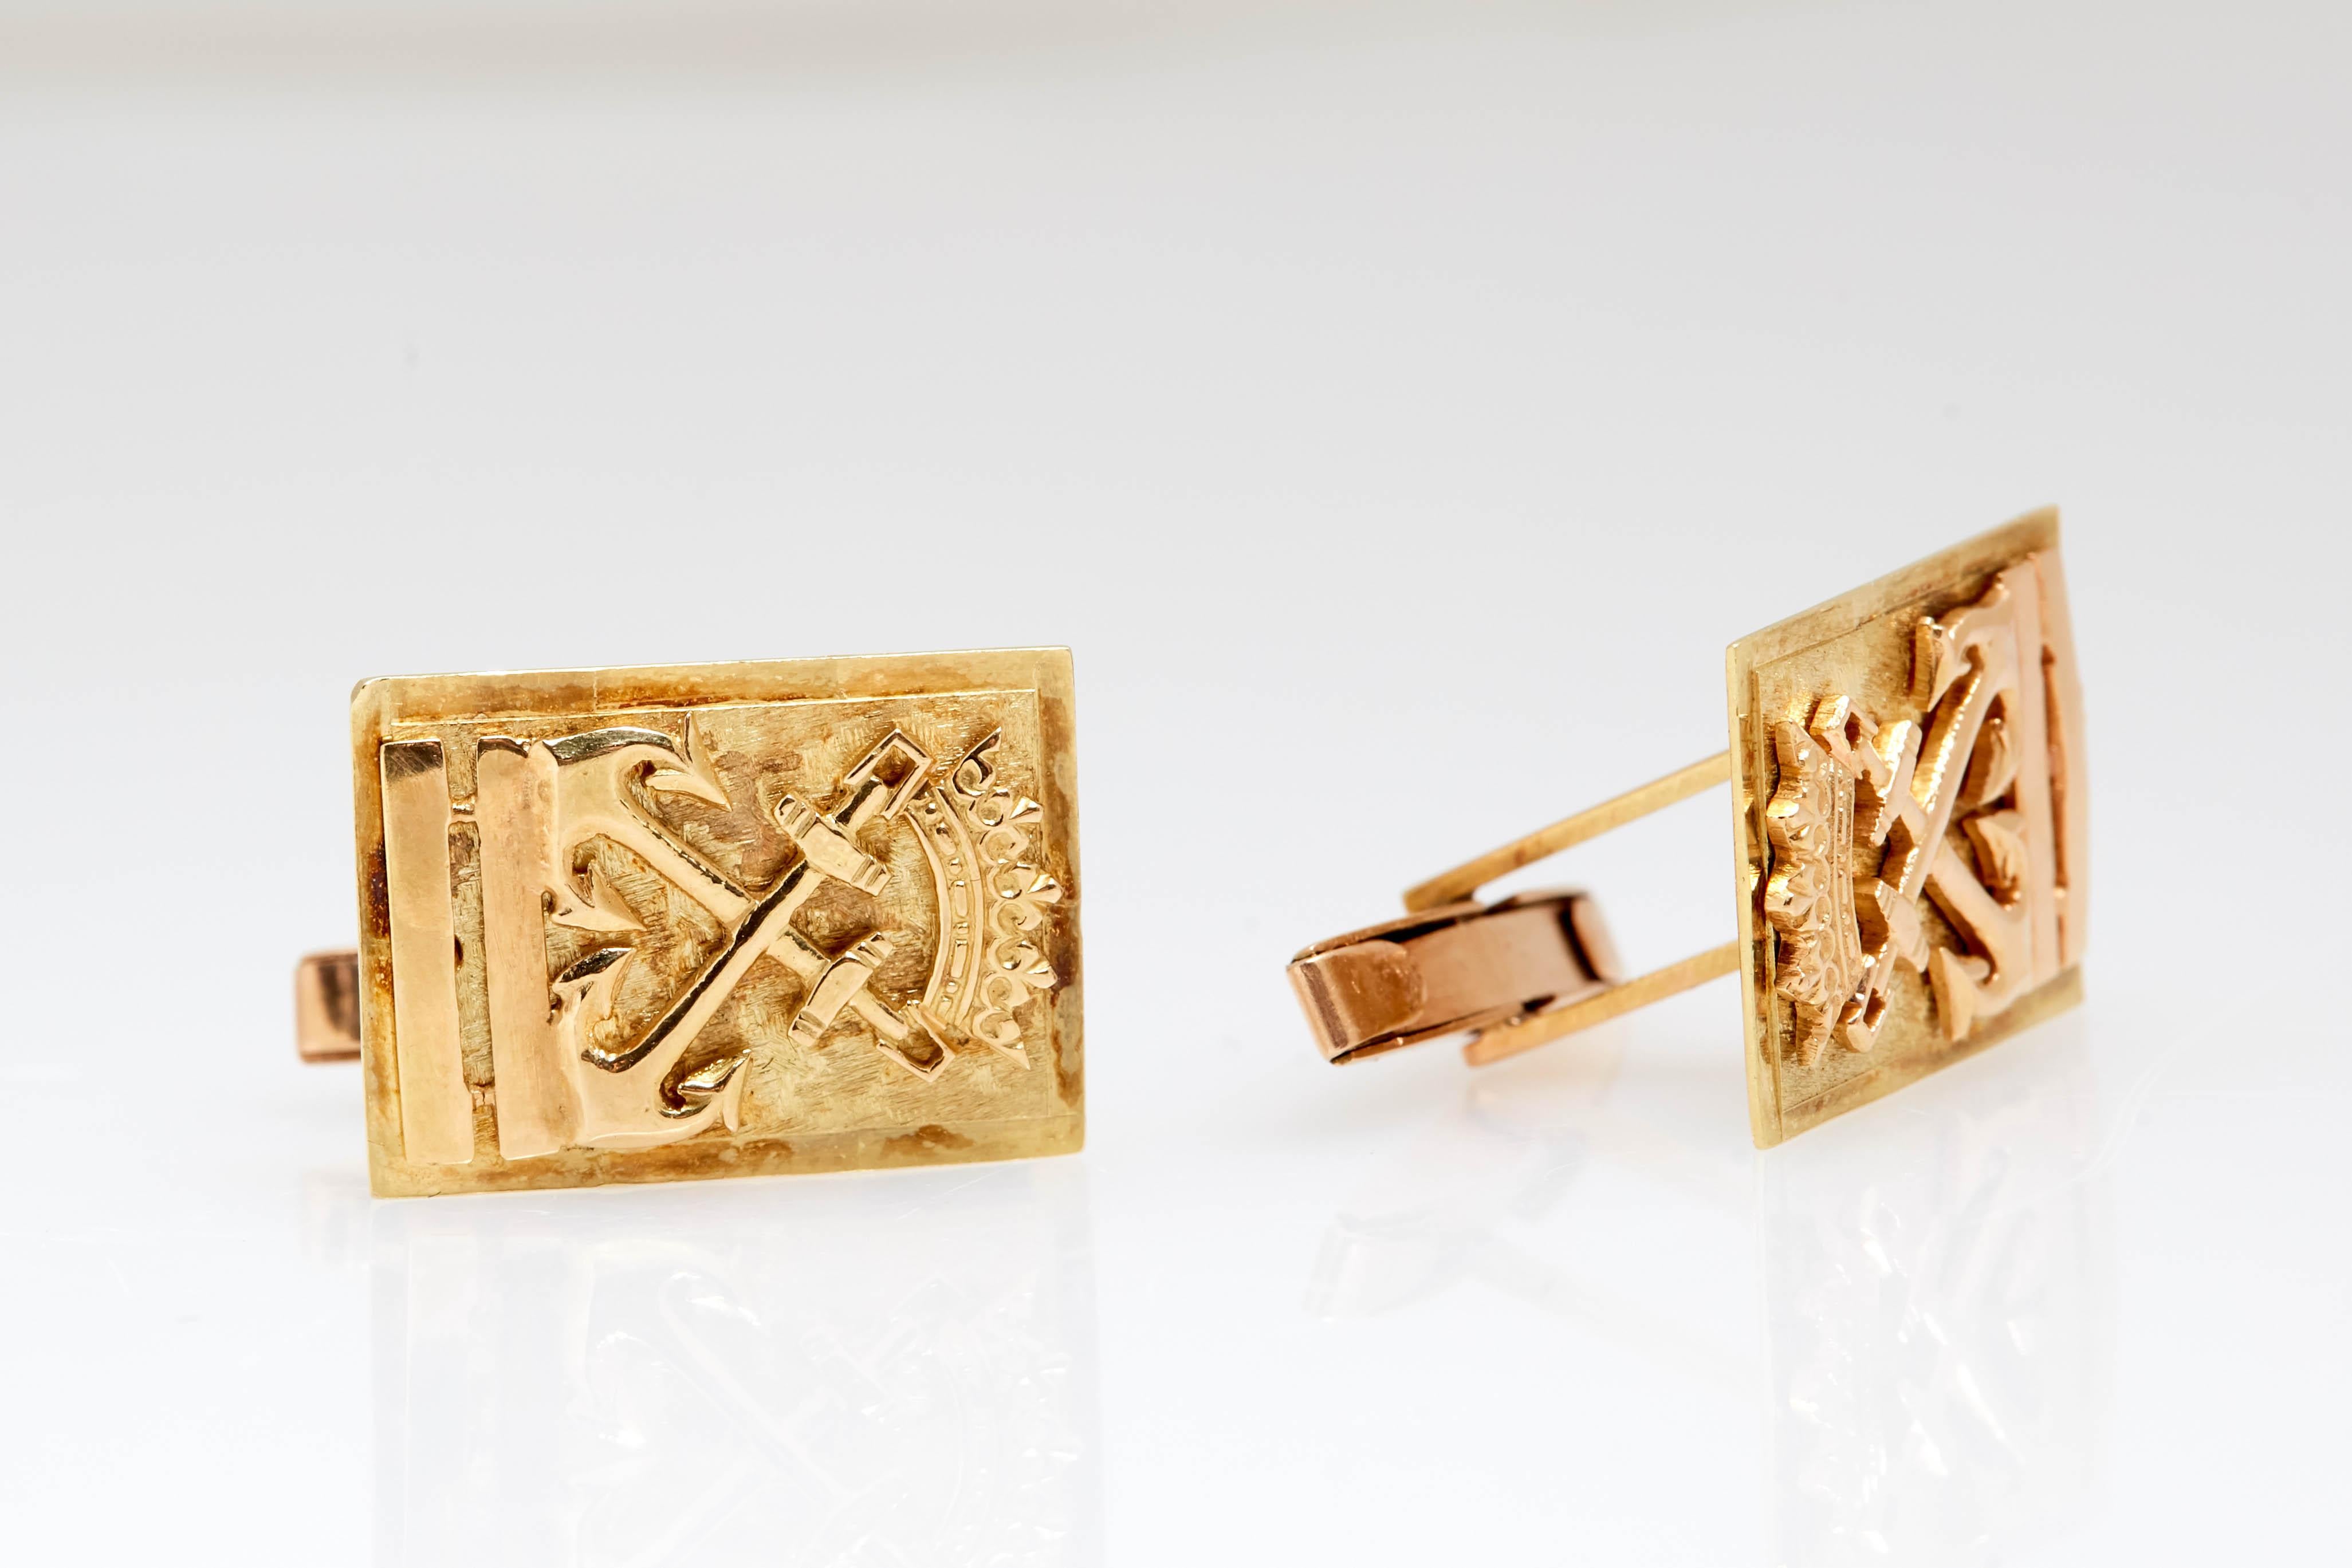 18kt yellow gold crossed double Anchor cufflinks. Made in Italy, circa 1960 